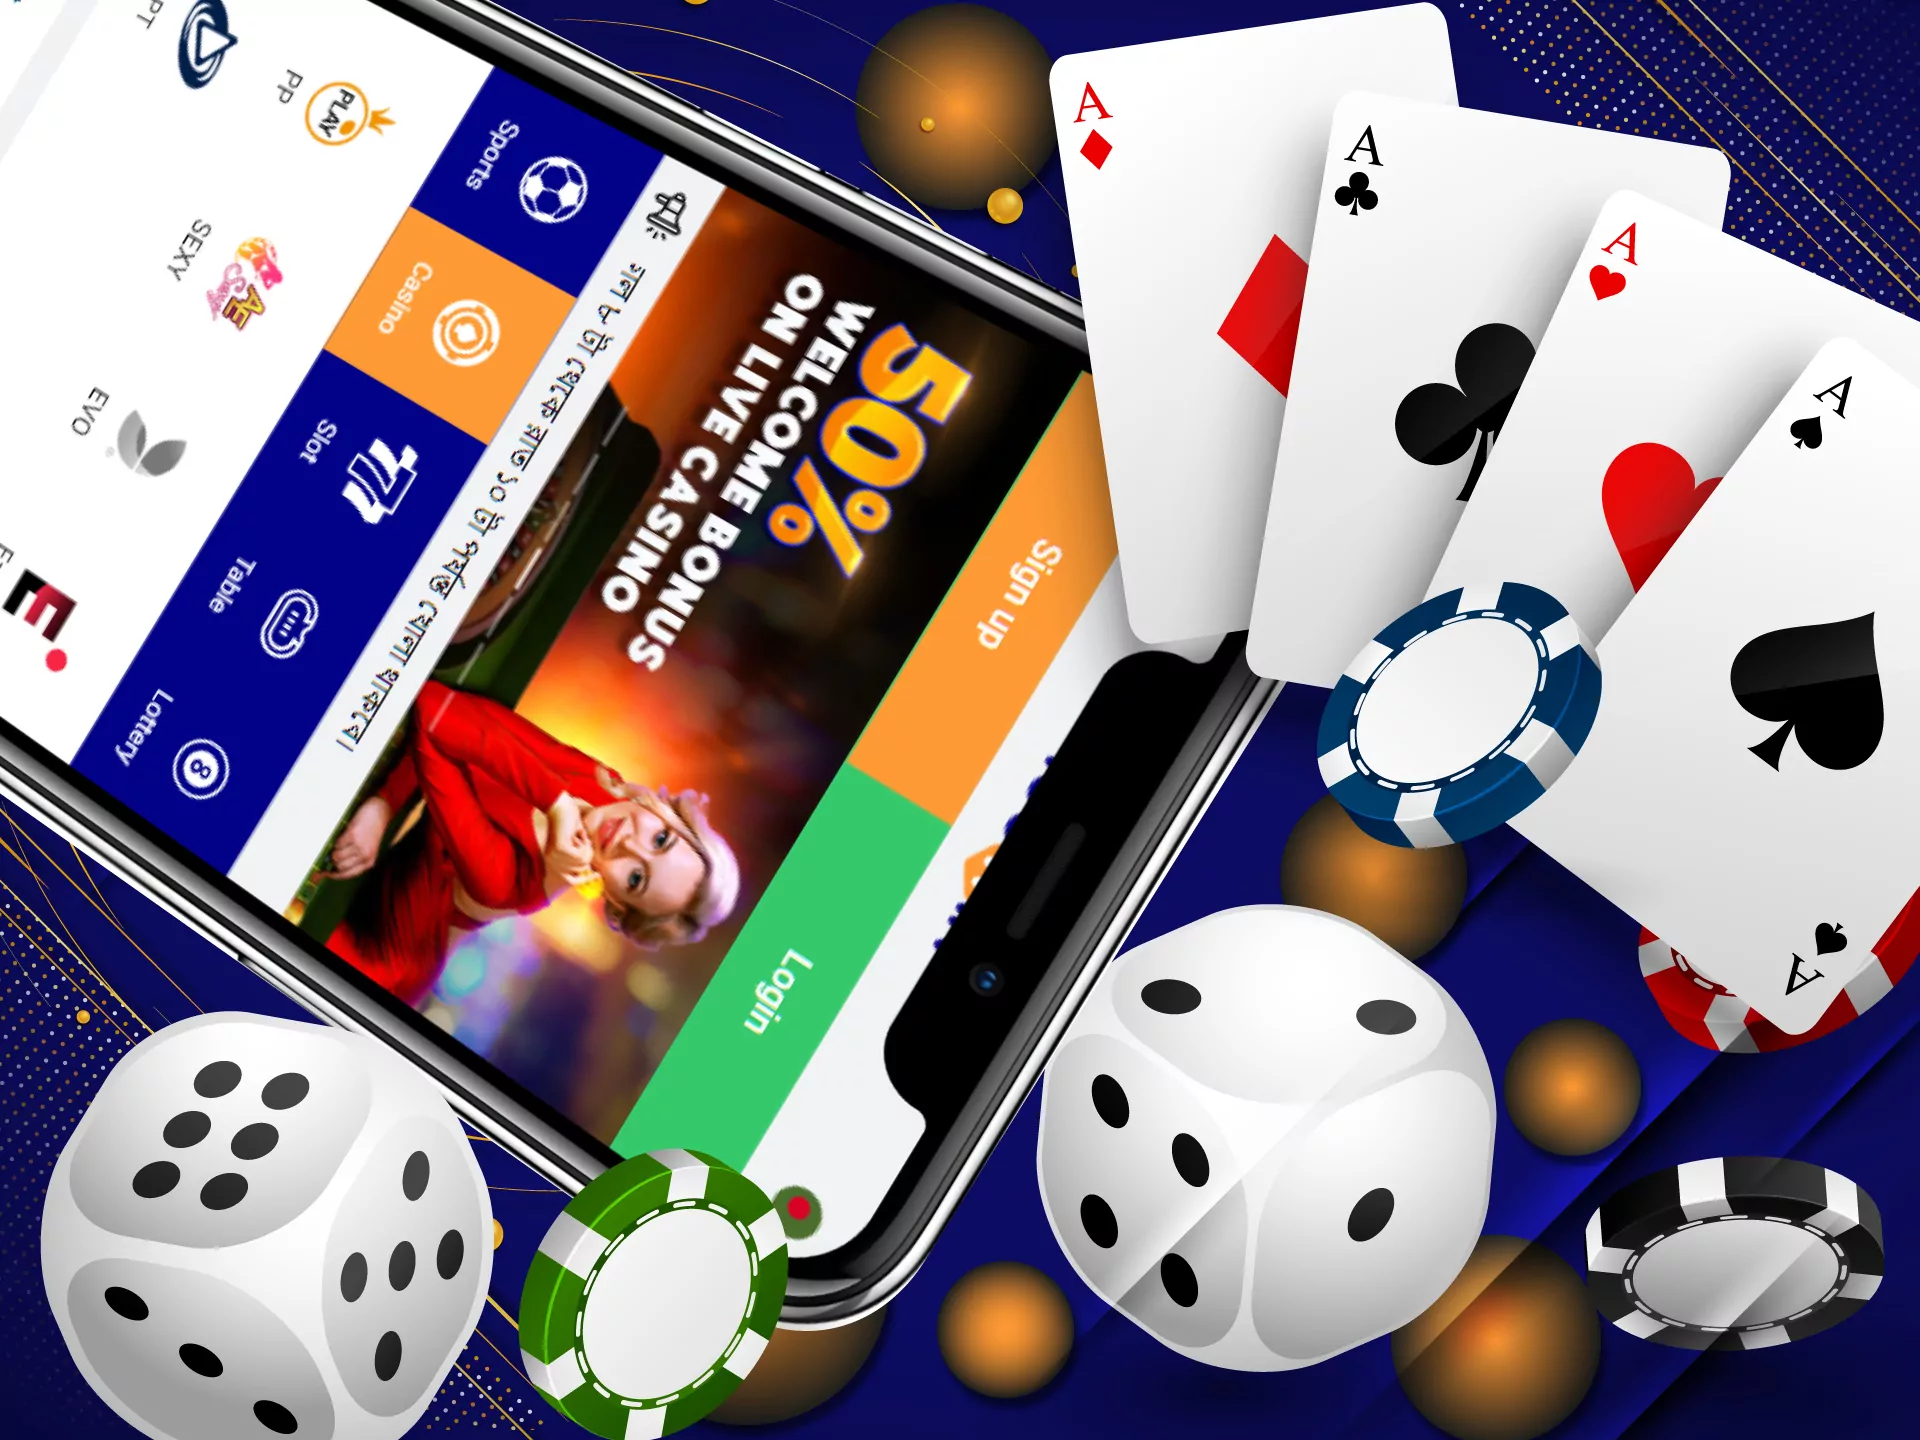 You can also play various casino games in the ICCWIN application.